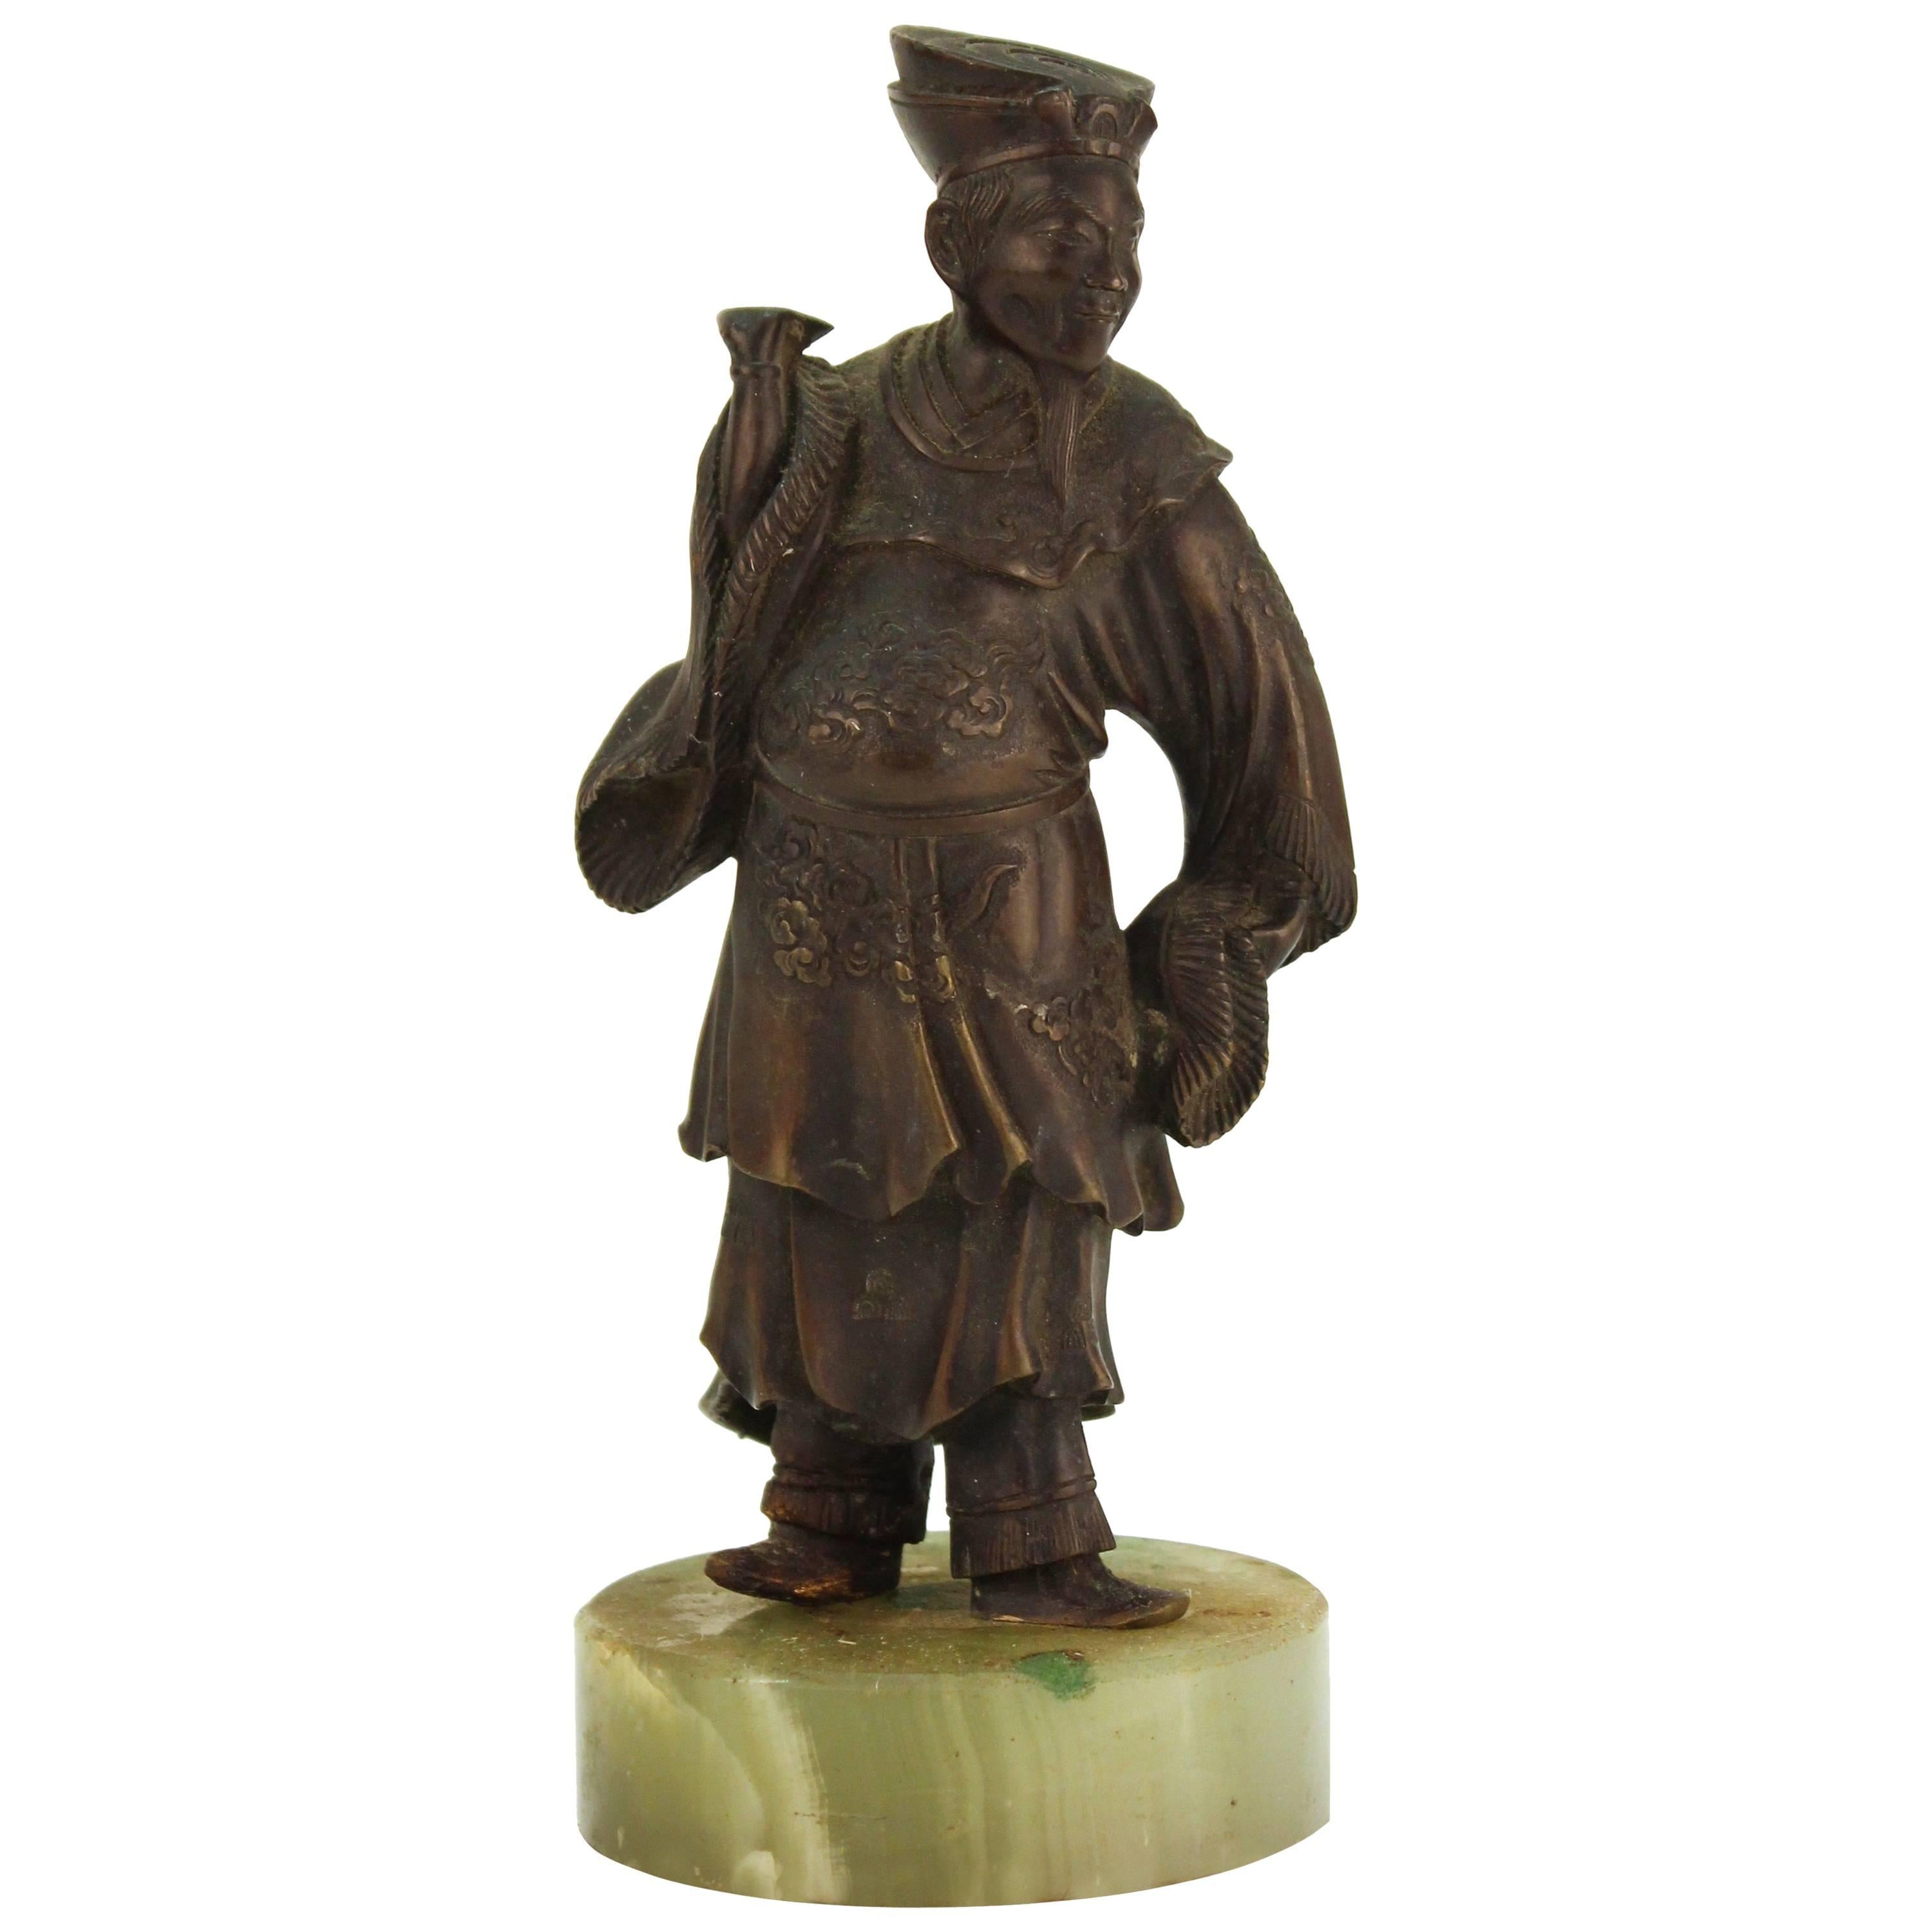 Japanese Court Figure in Bronzed Metal on Stone Base